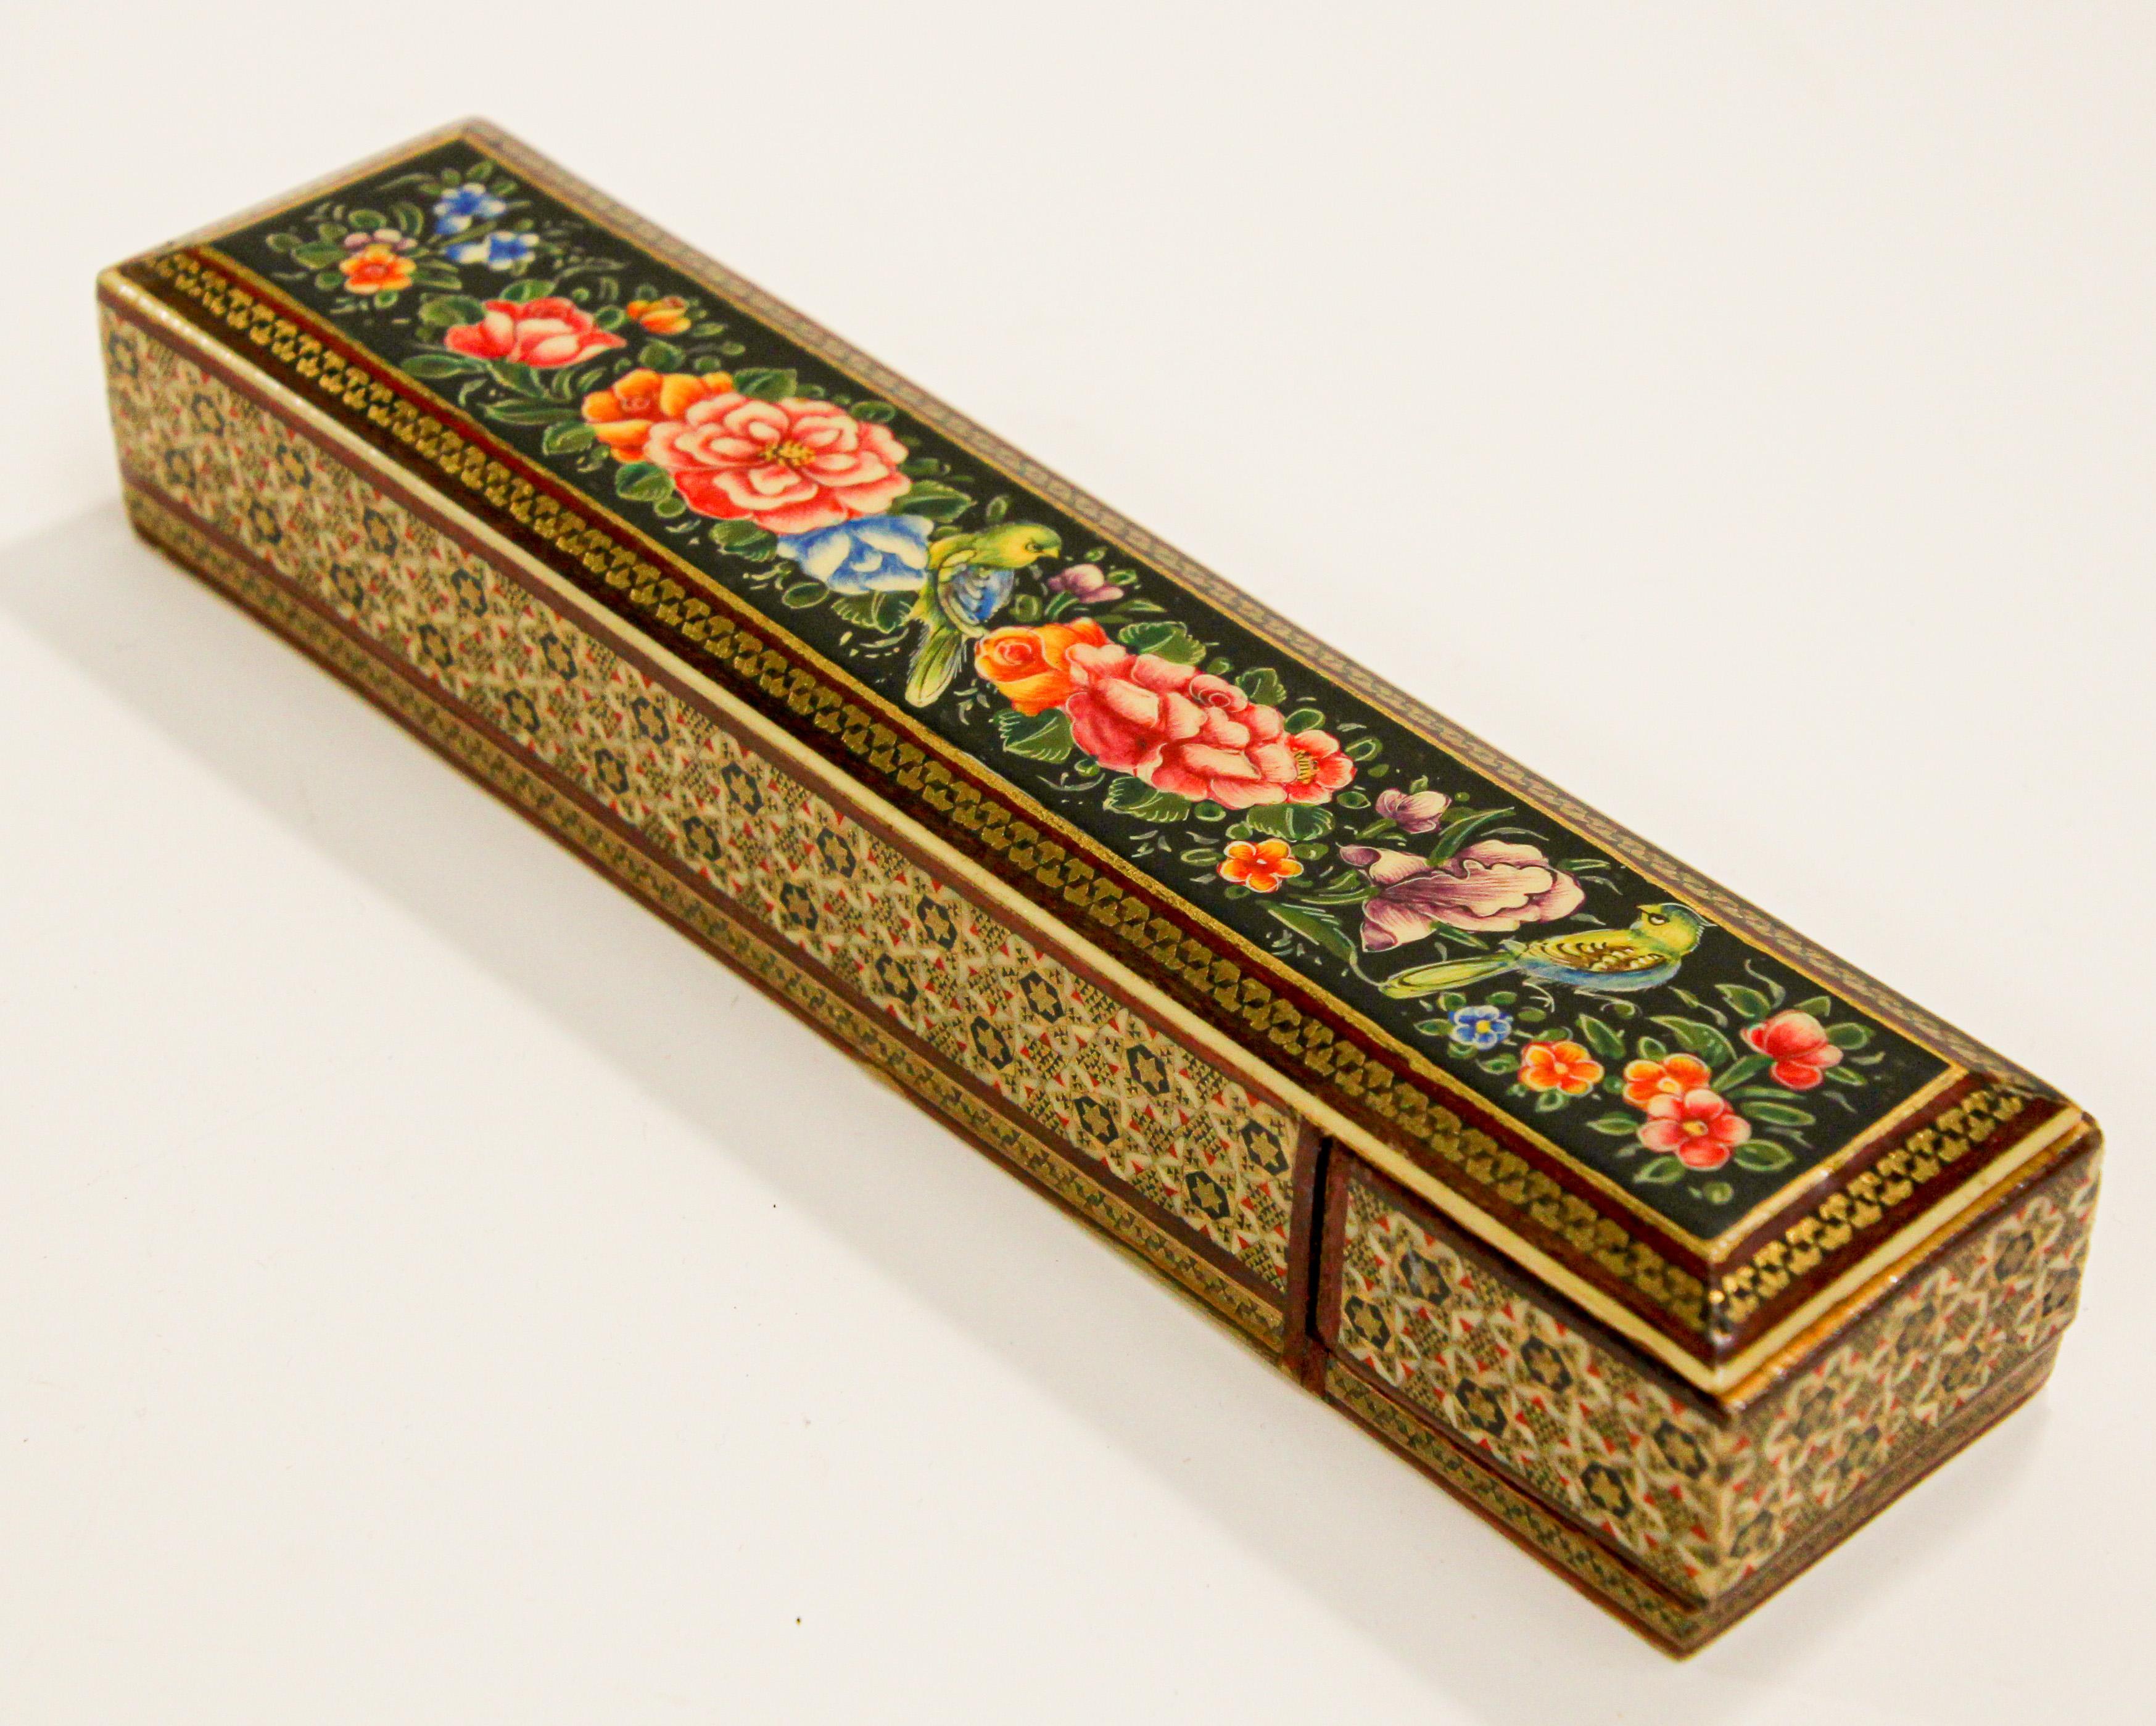 Middle Eastern Persian style hand painted lacquer pen box in rectangular shape.
Decorated with floral designs on black background.
Moorish pen box papier maché.
Size is 8